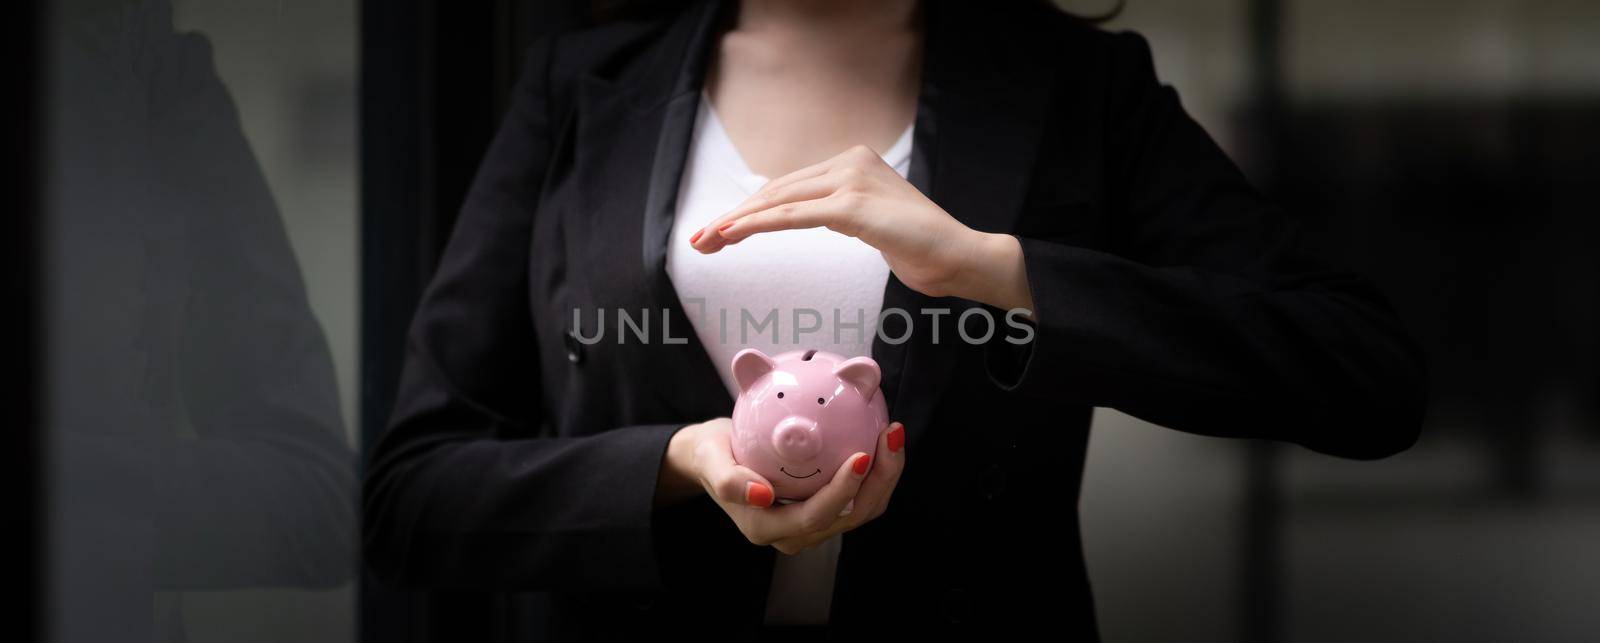 Panoramic image, Business woman hand holding and cover piggy bank. Save money and financial investment concept.